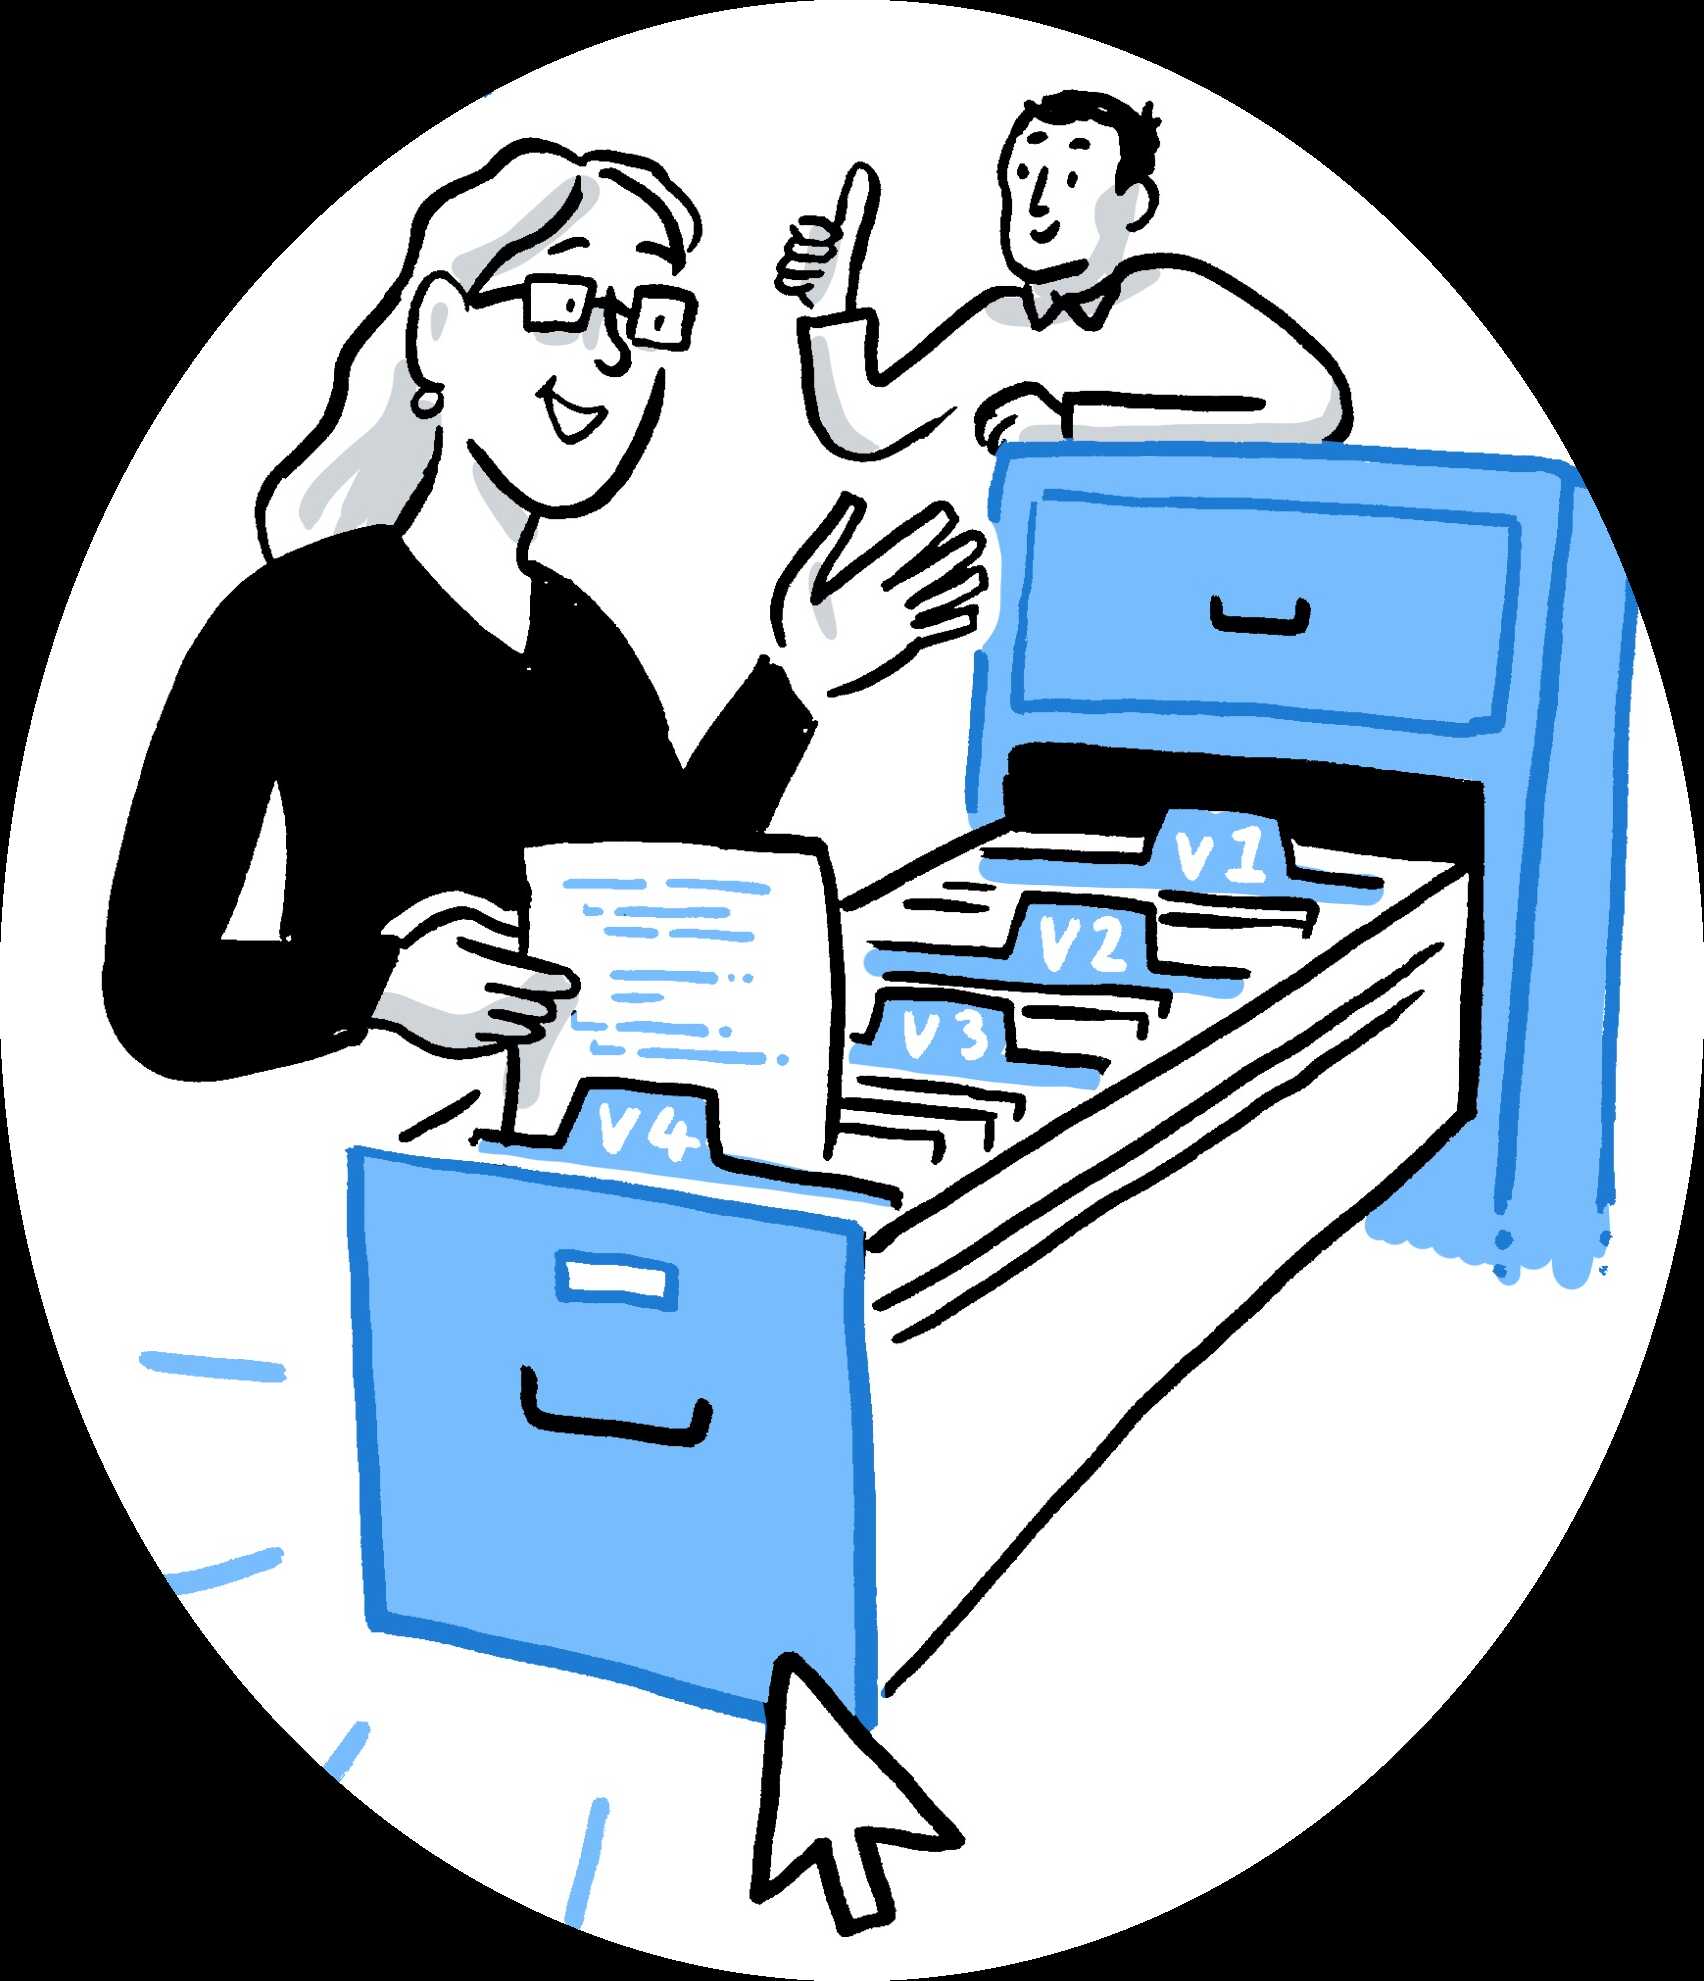 Two people happily browsing files in a drawer of documents.